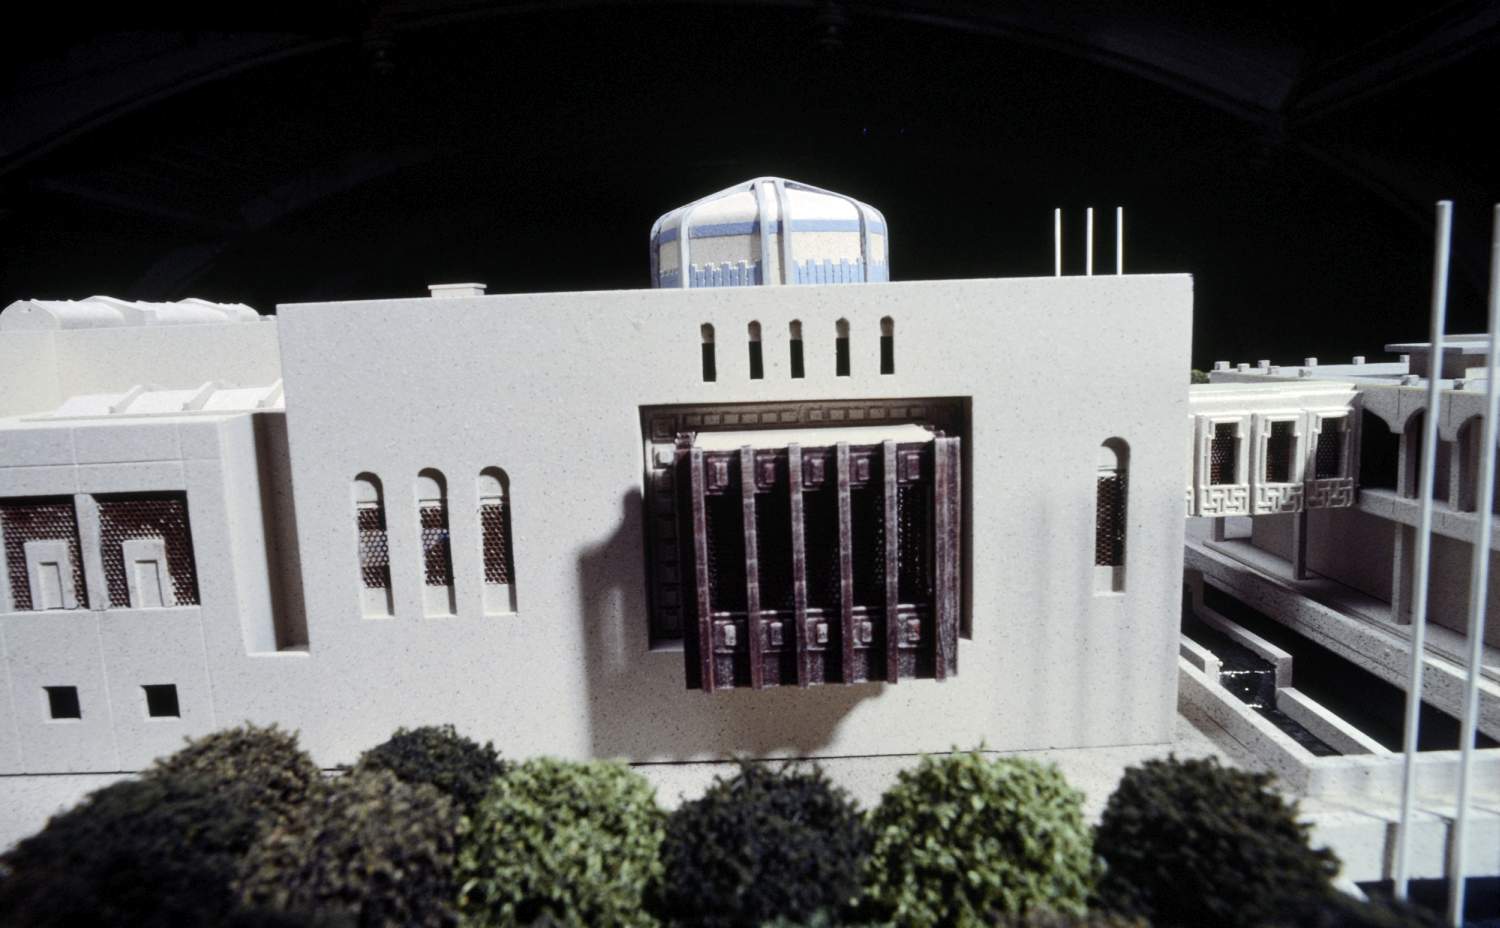 <p>View of architectural model, showing detail of projecting bay windows</p>